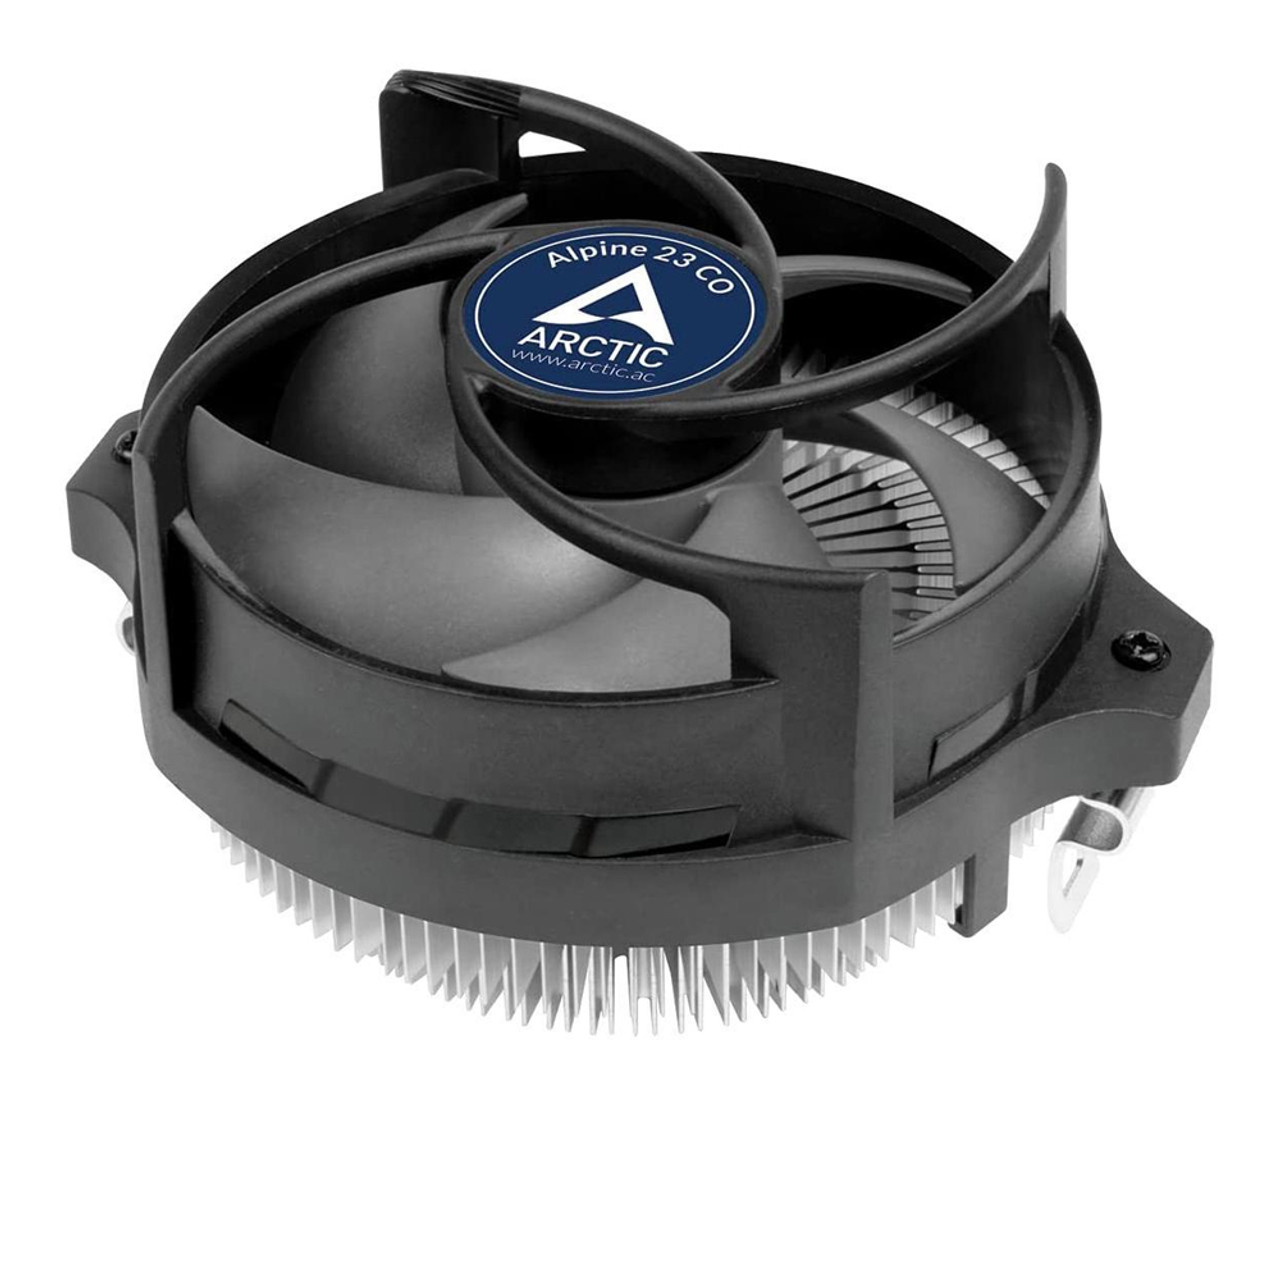 Arctic ACALP00036A Alpine 23 CO Compact AMD CPU Cooler for continuous operation